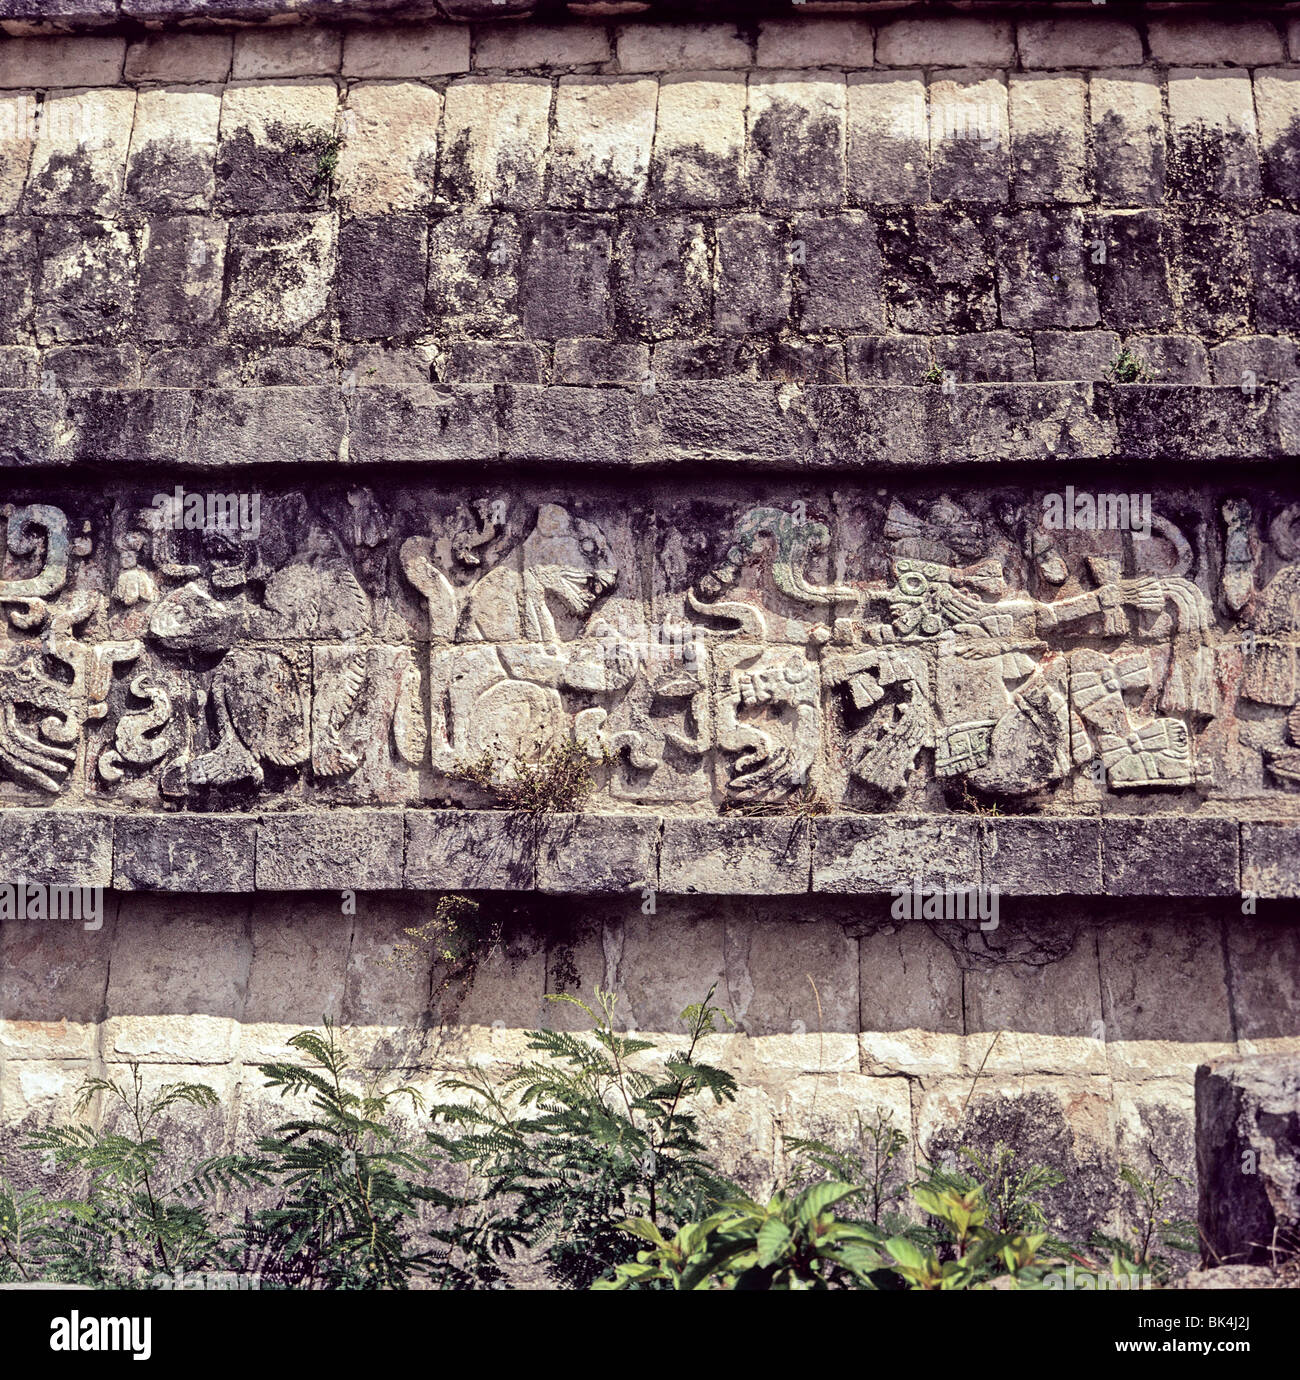 Relief sculpture depicting jaguars holding human hearts, Chichen Itza, Mexico Stock Photo